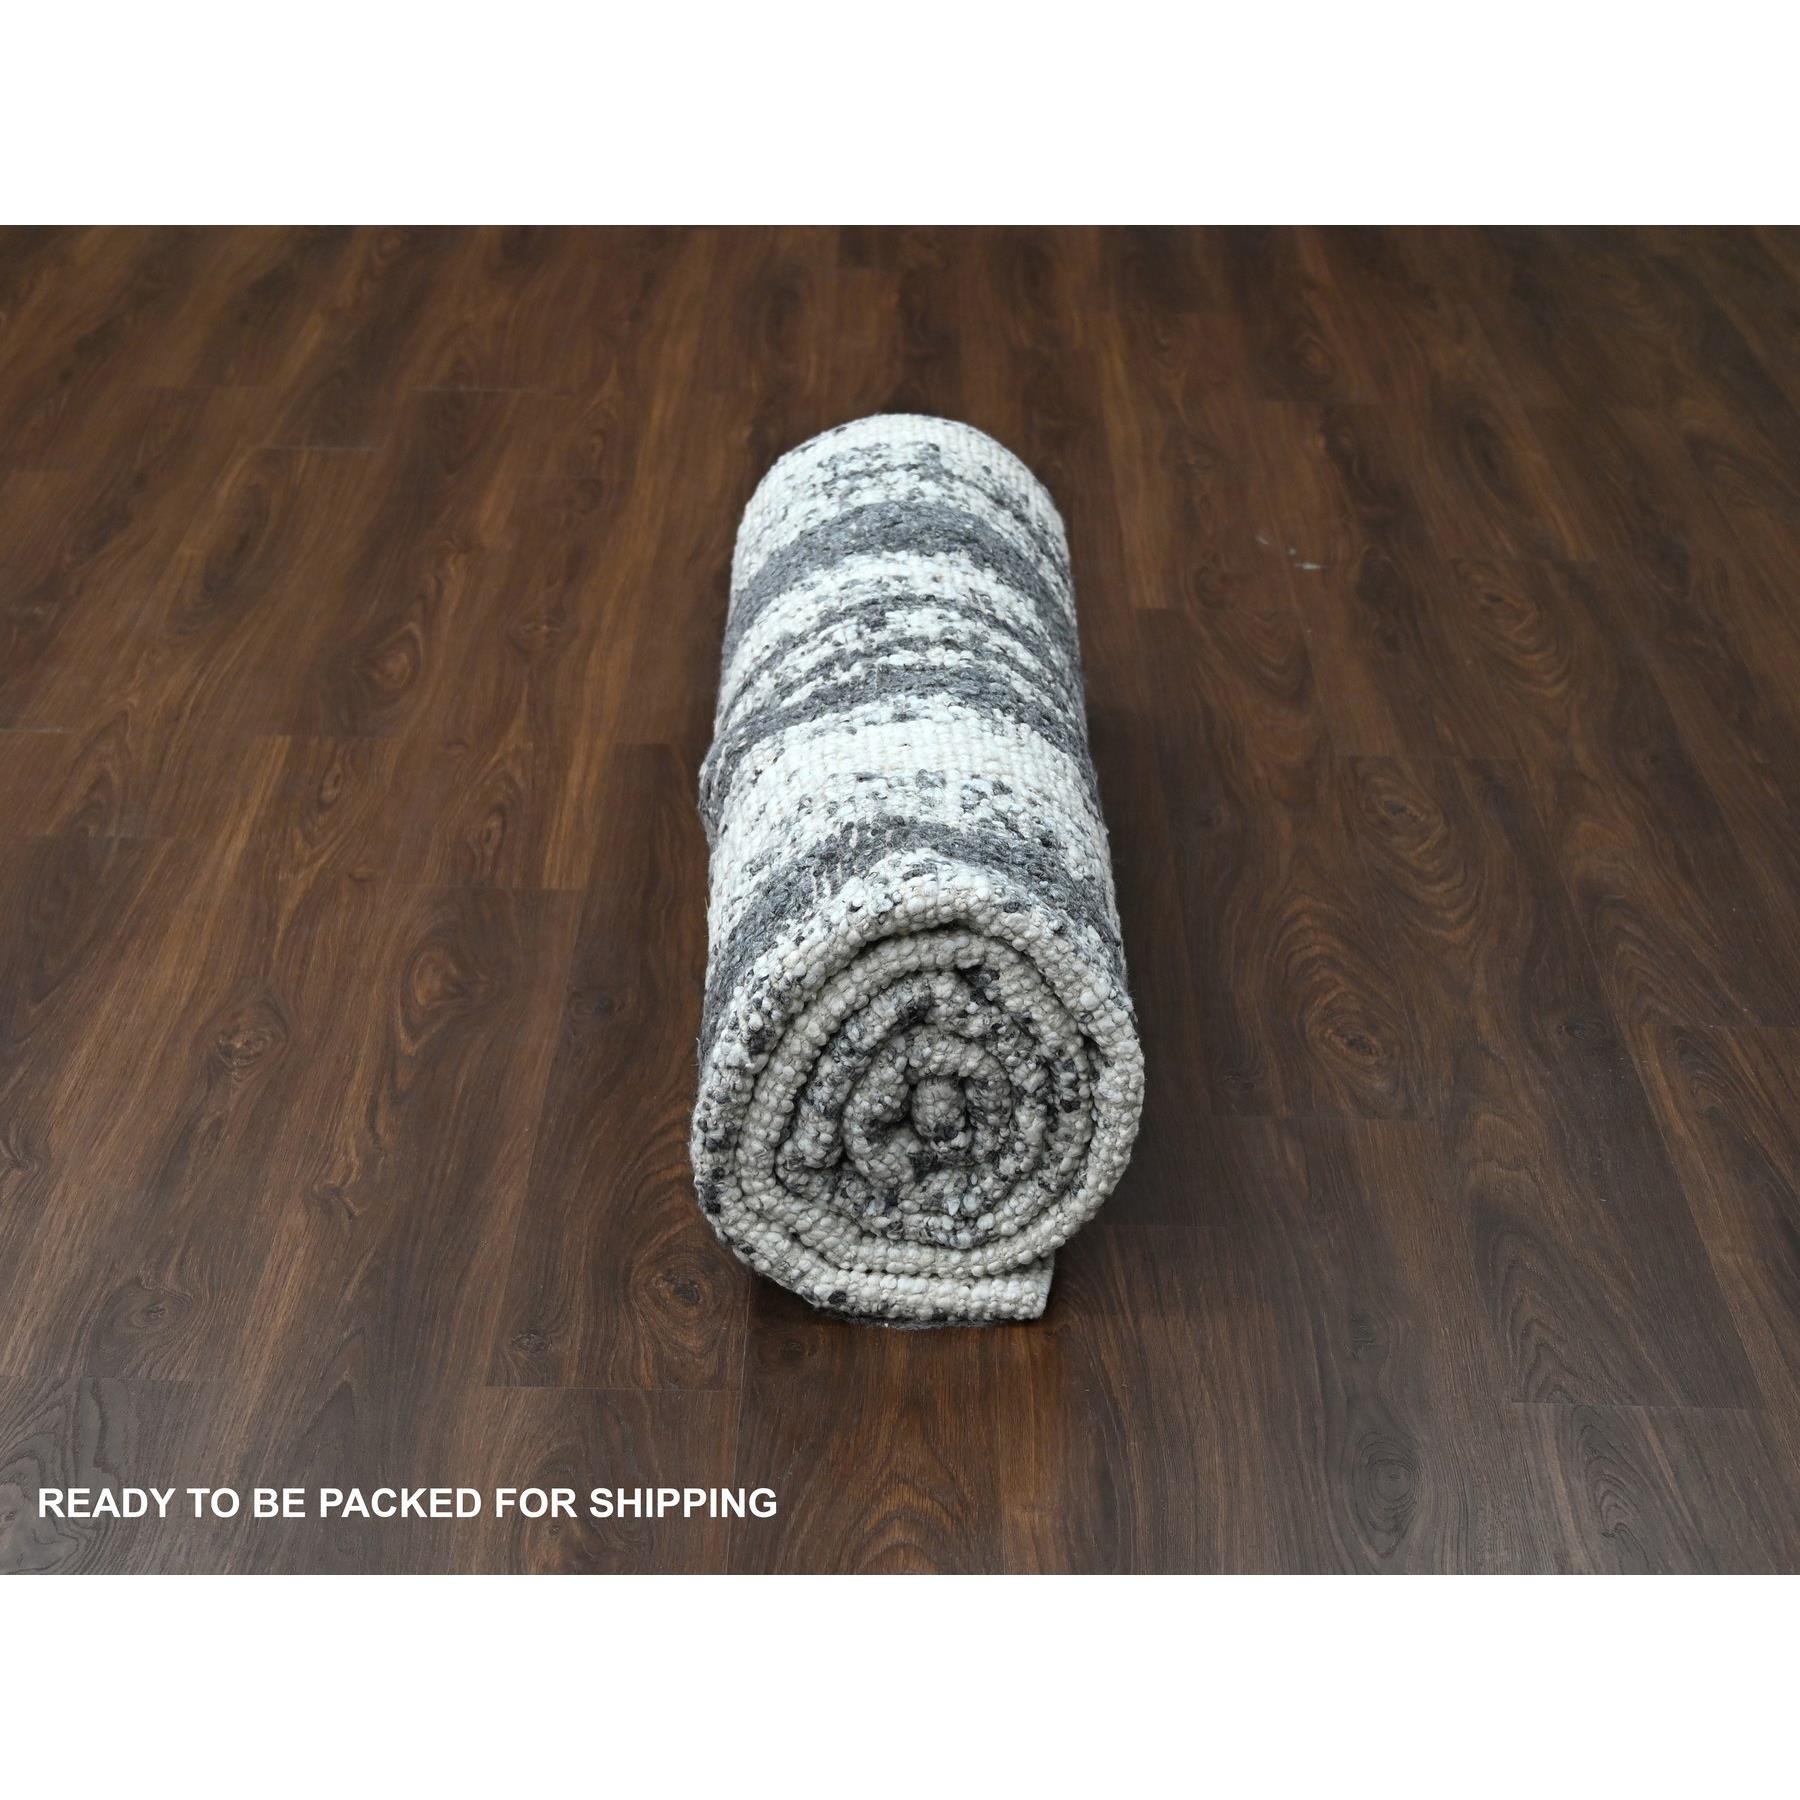 Modern-and-Contemporary-Hand-Knotted-Rug-421045